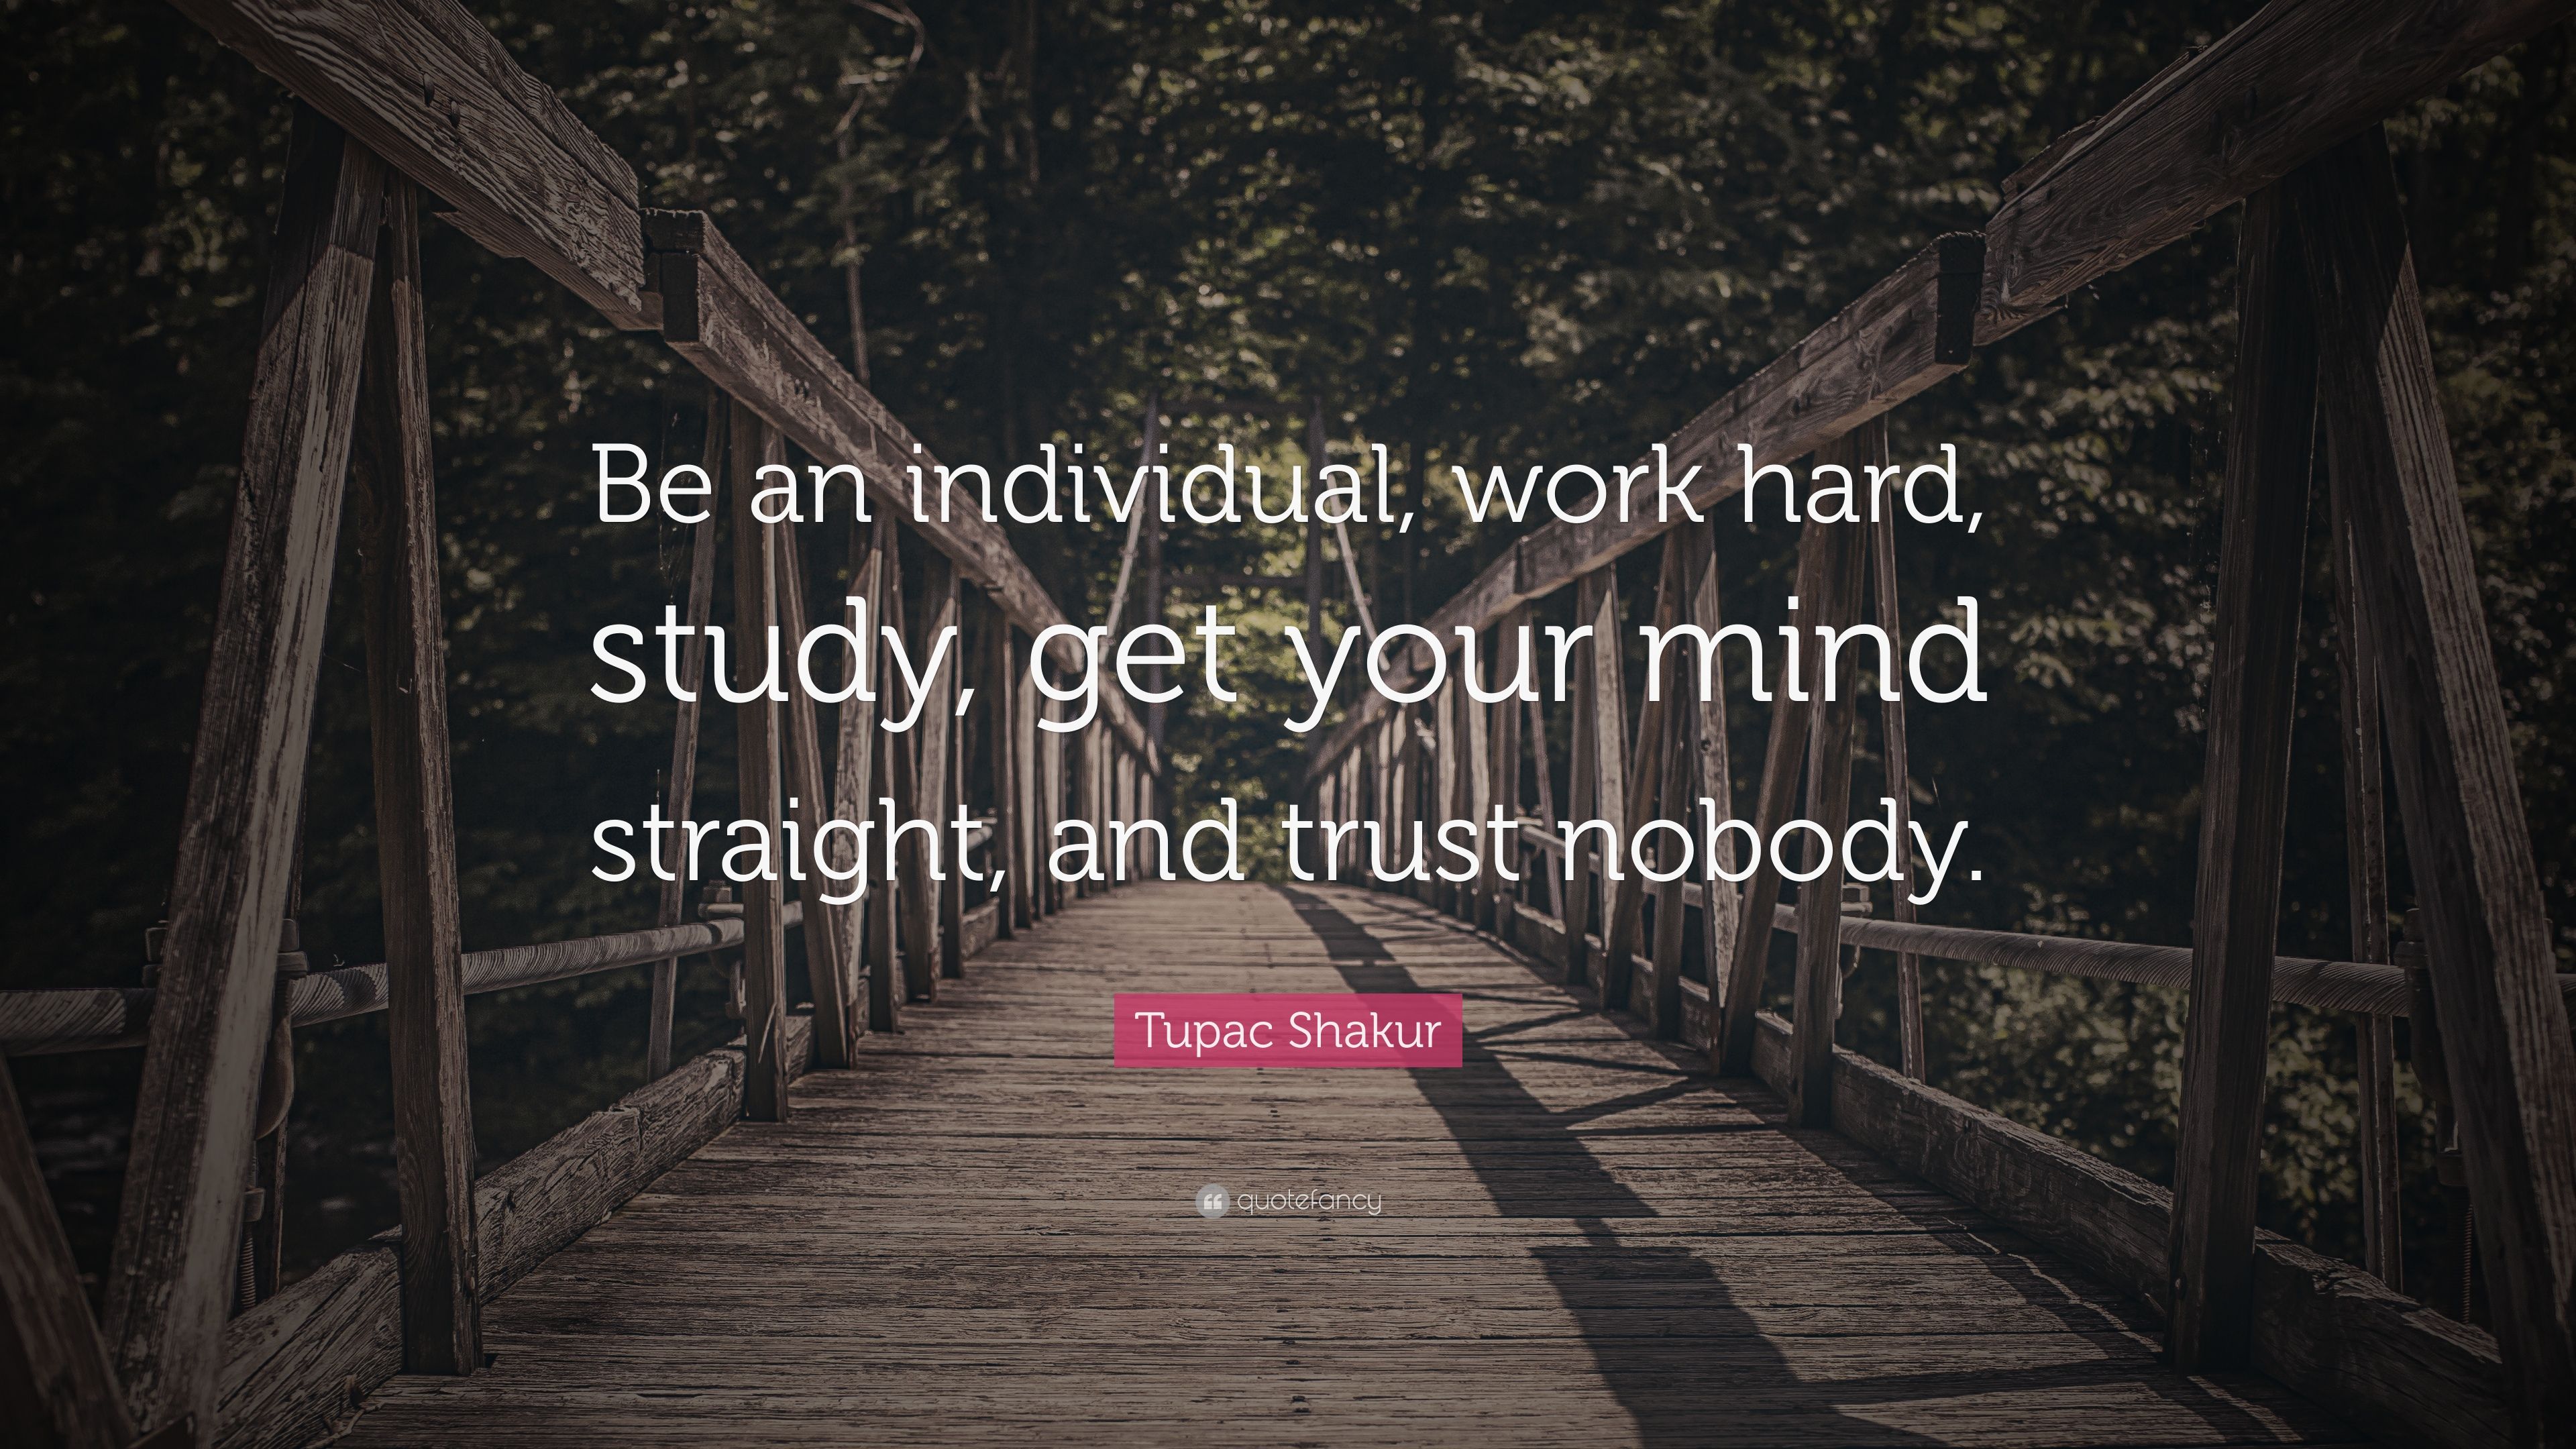 Tupac Shakur Quote: “Be an individual, work hard, study, get your mind straight, and trust nobody.”